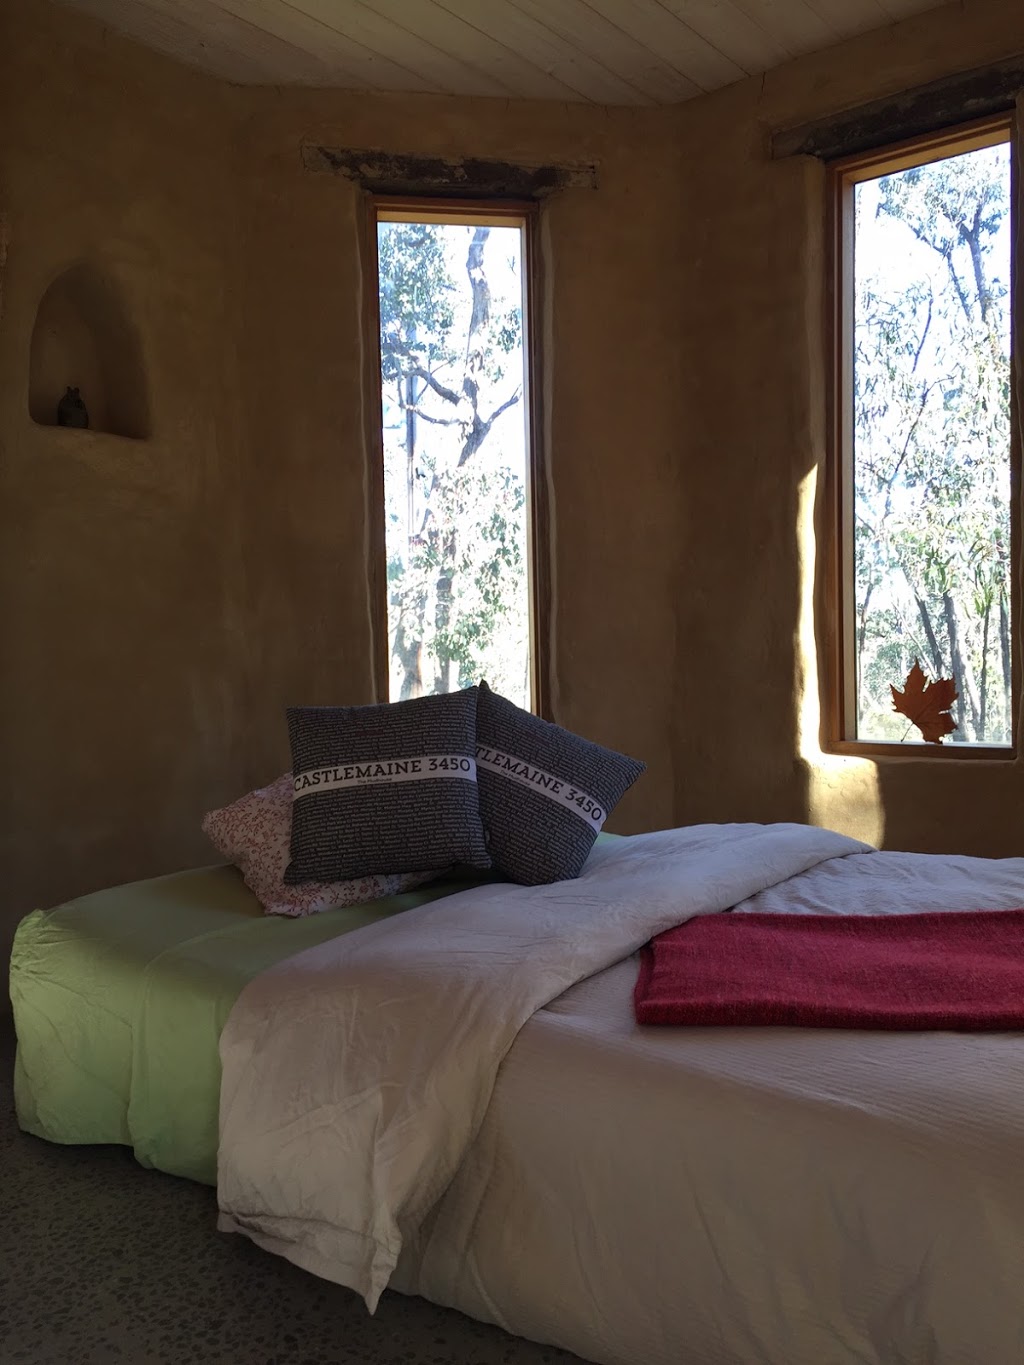 The Mud House | lodging | 80 Willy Milly Rd, Castlemaine VIC 3450, Australia | 0419115486 OR +61 419 115 486